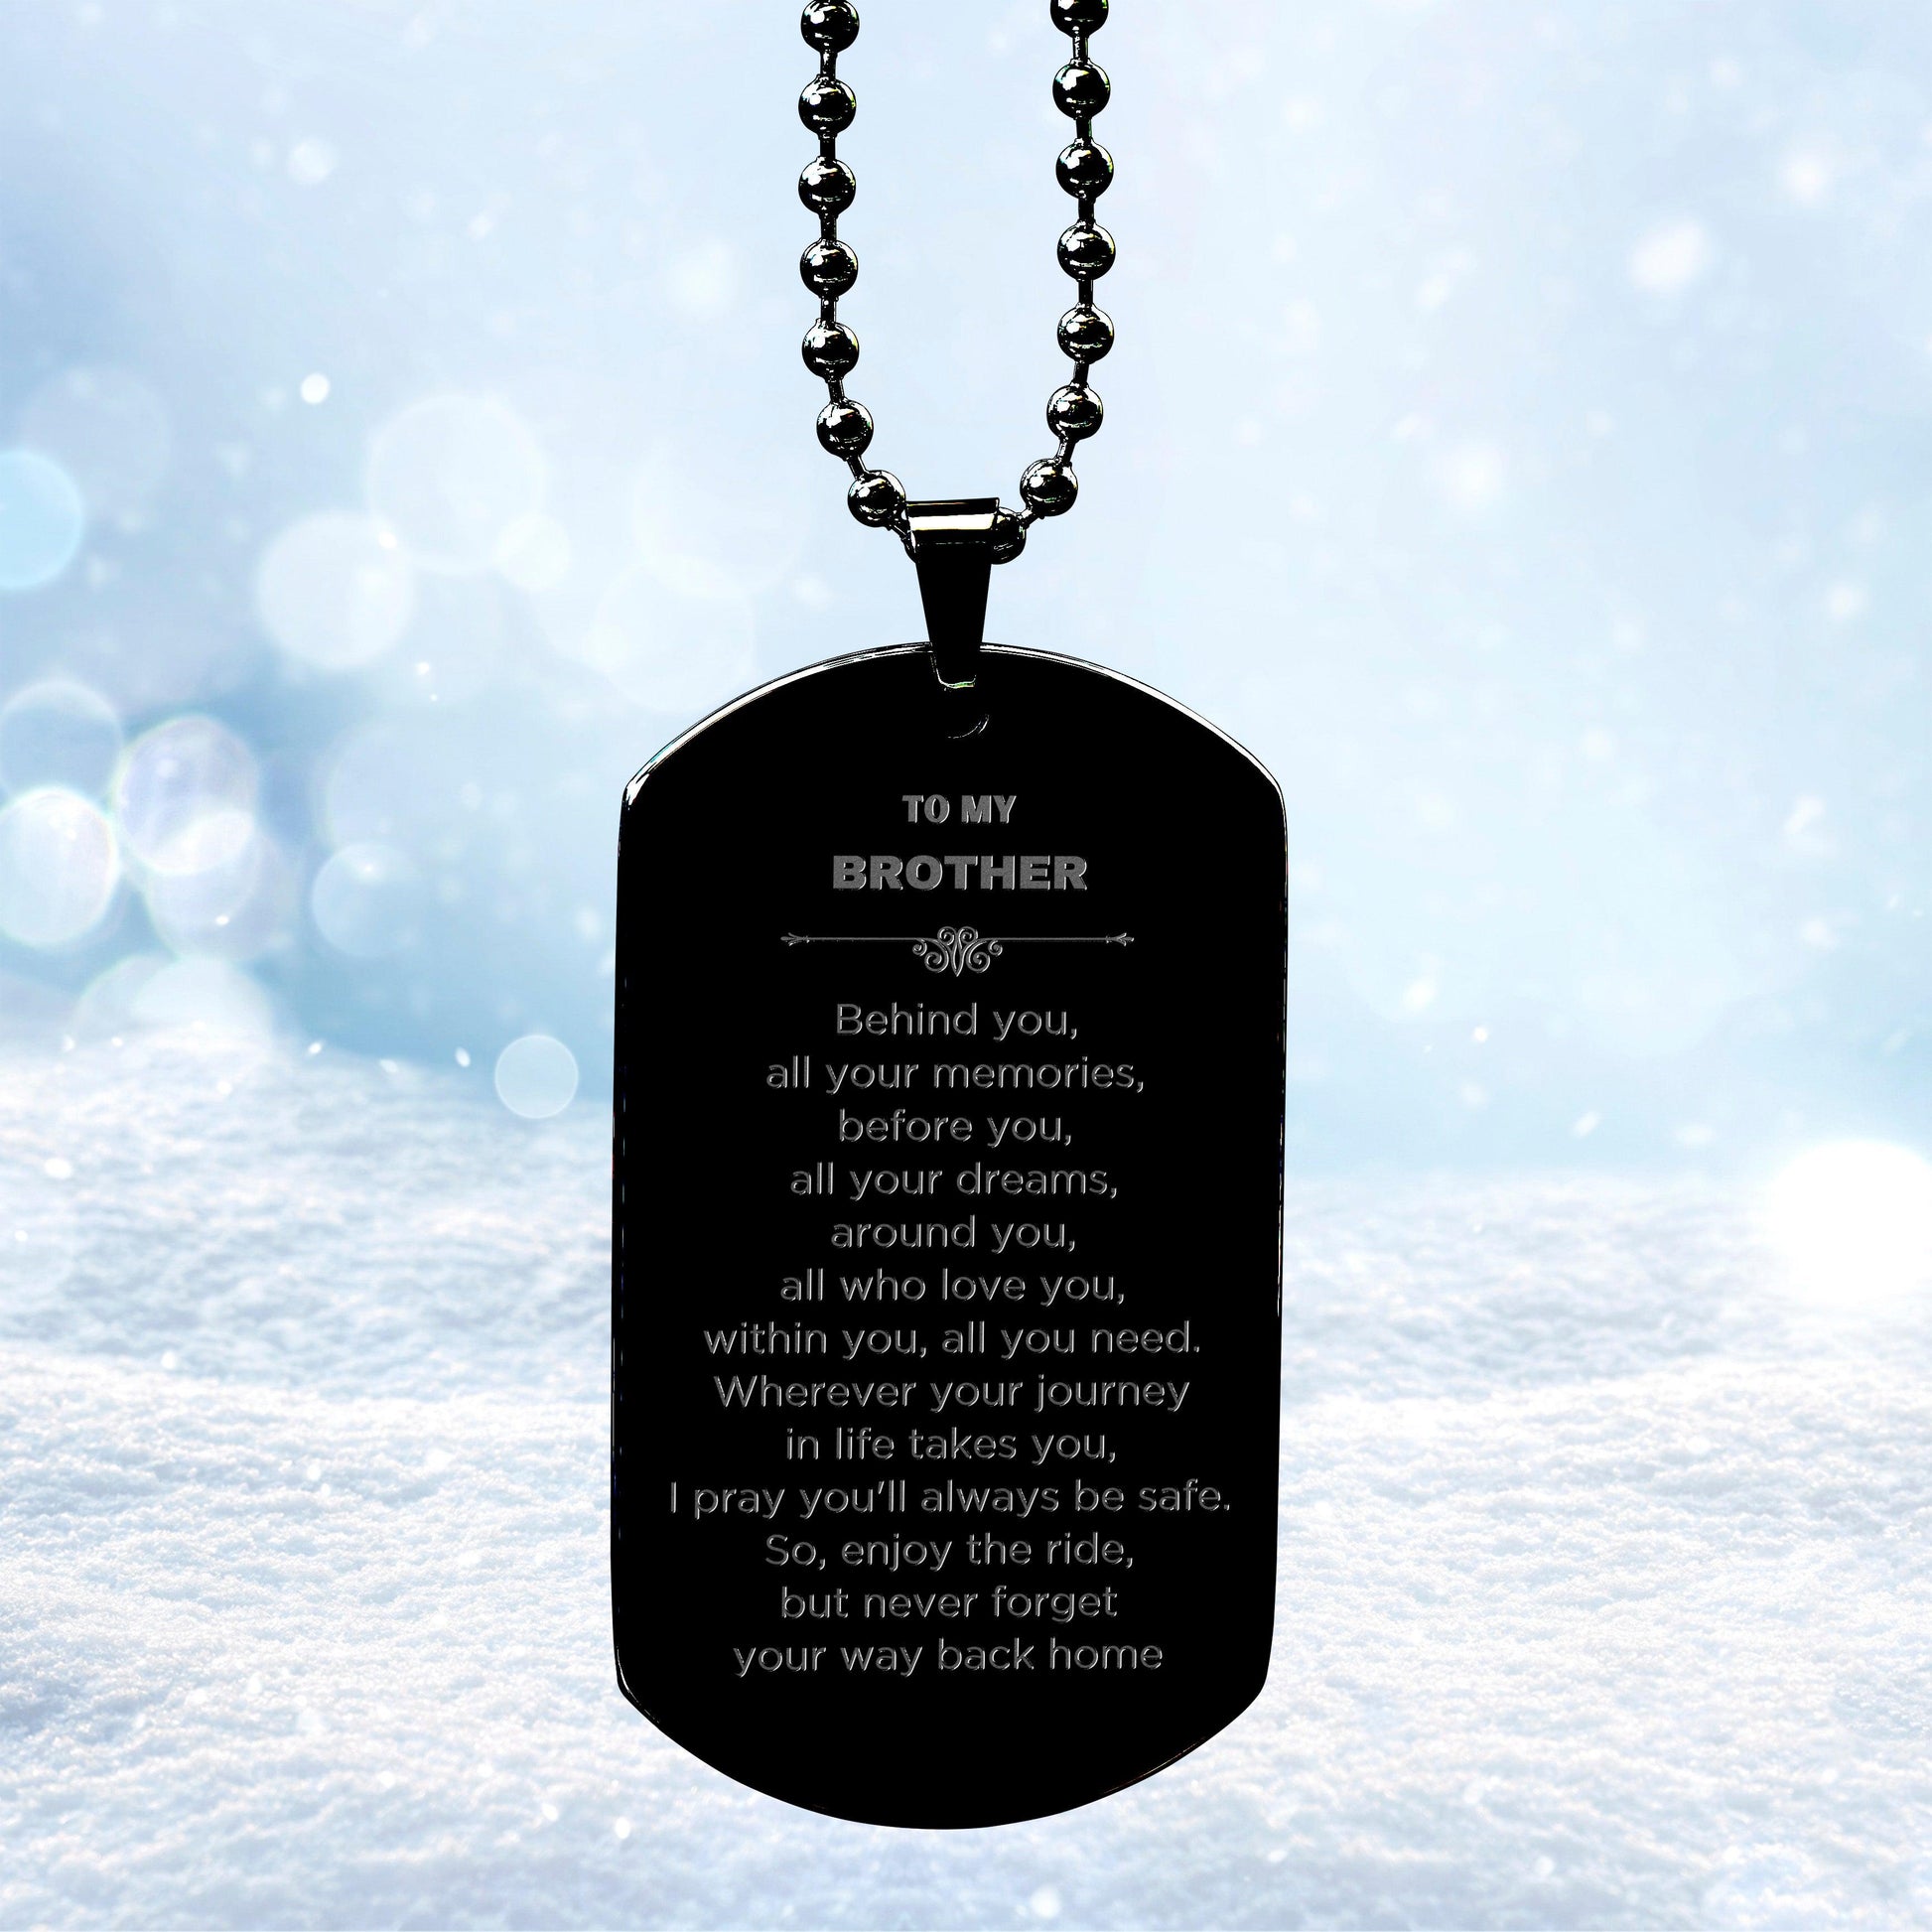 Brother Black Dog Tag Necklace Birthday Christmas Unique Gifts Behind you, all your memories, before you, all your dreams - Mallard Moon Gift Shop